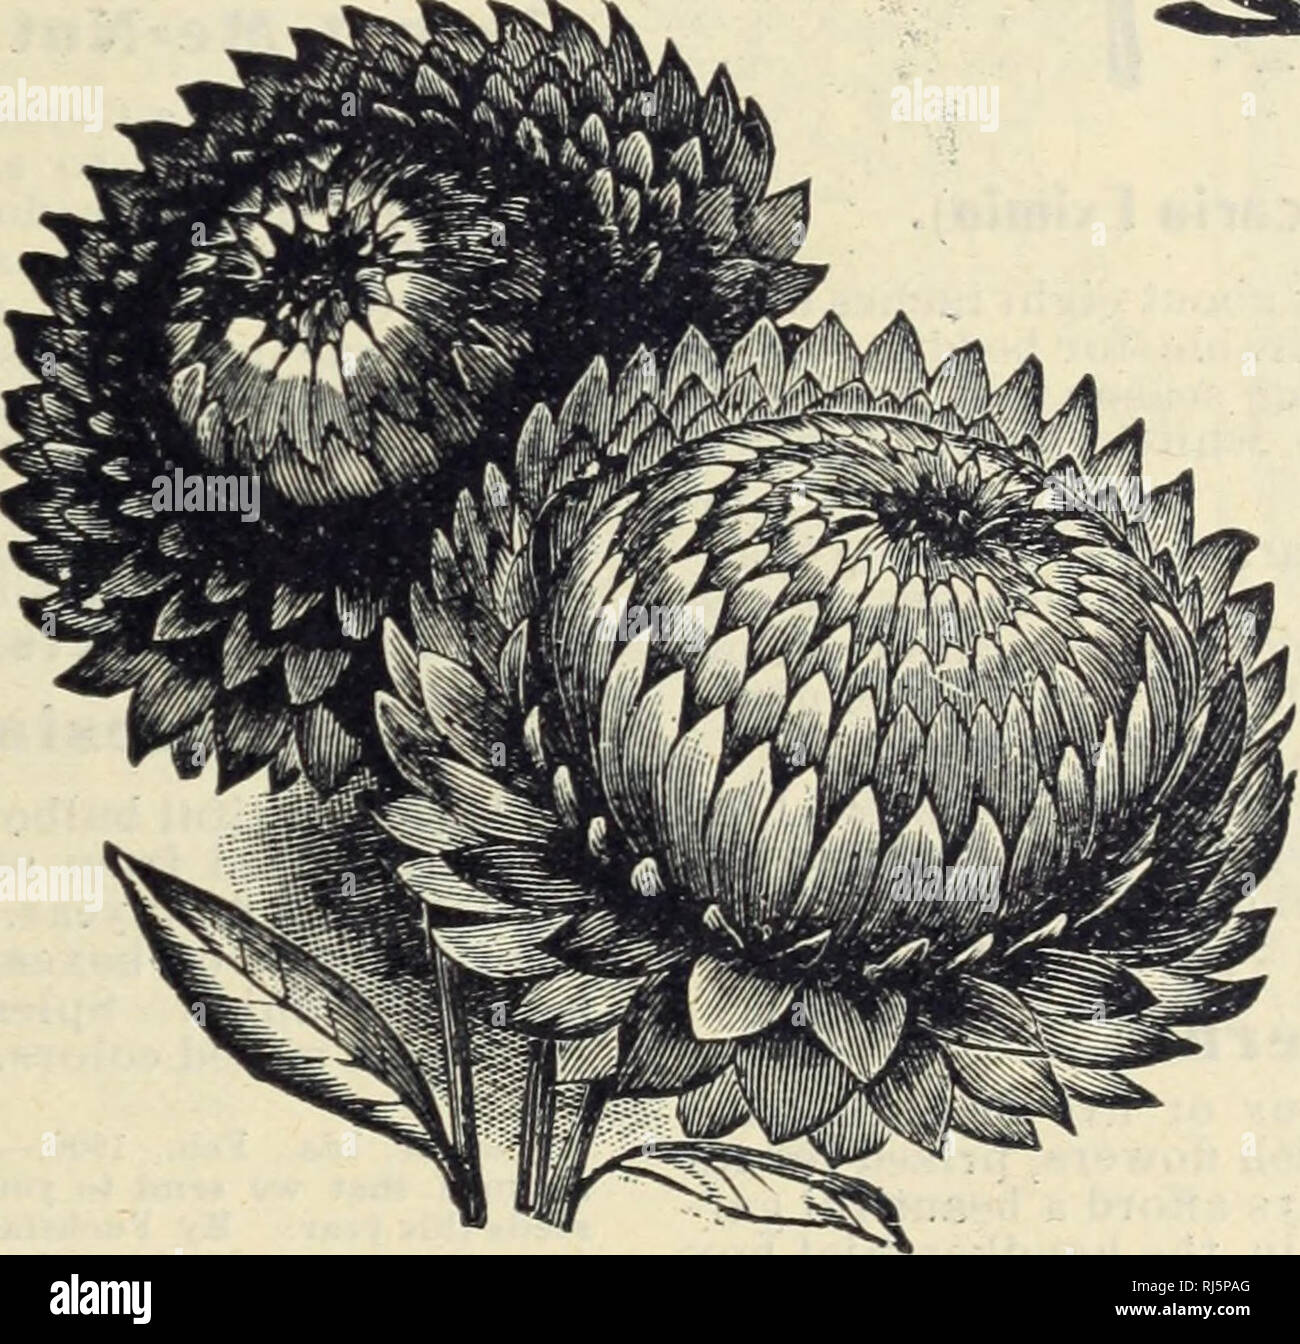 . Choice flower seeds. Flowers Seeds Catalogs; Seeds Catalogs; Vegetables Seeds Catalogs. EDELWEISS. Helichrysum Monstrosum. A popular Everlasting almoat as showy in the garden as an As- , ter. Blossoms large and extra double, and in many I shades of yellow and scarlet. Mixed. Pkt., 3 CtS. Globe Amaranth. The plants bear great quantities of clover-like blossoms, attractive in bud and flowers. Mixed. Pkt., 3 CtS. , Helipterum Sanfordi. Bears large globular clusters of bright golden yellow flowers. Pkt., 3 cts. Rhodanthe. Fine for the garden er pot cul- ture. Flowers deep blood-red, rose and yel Stock Photo